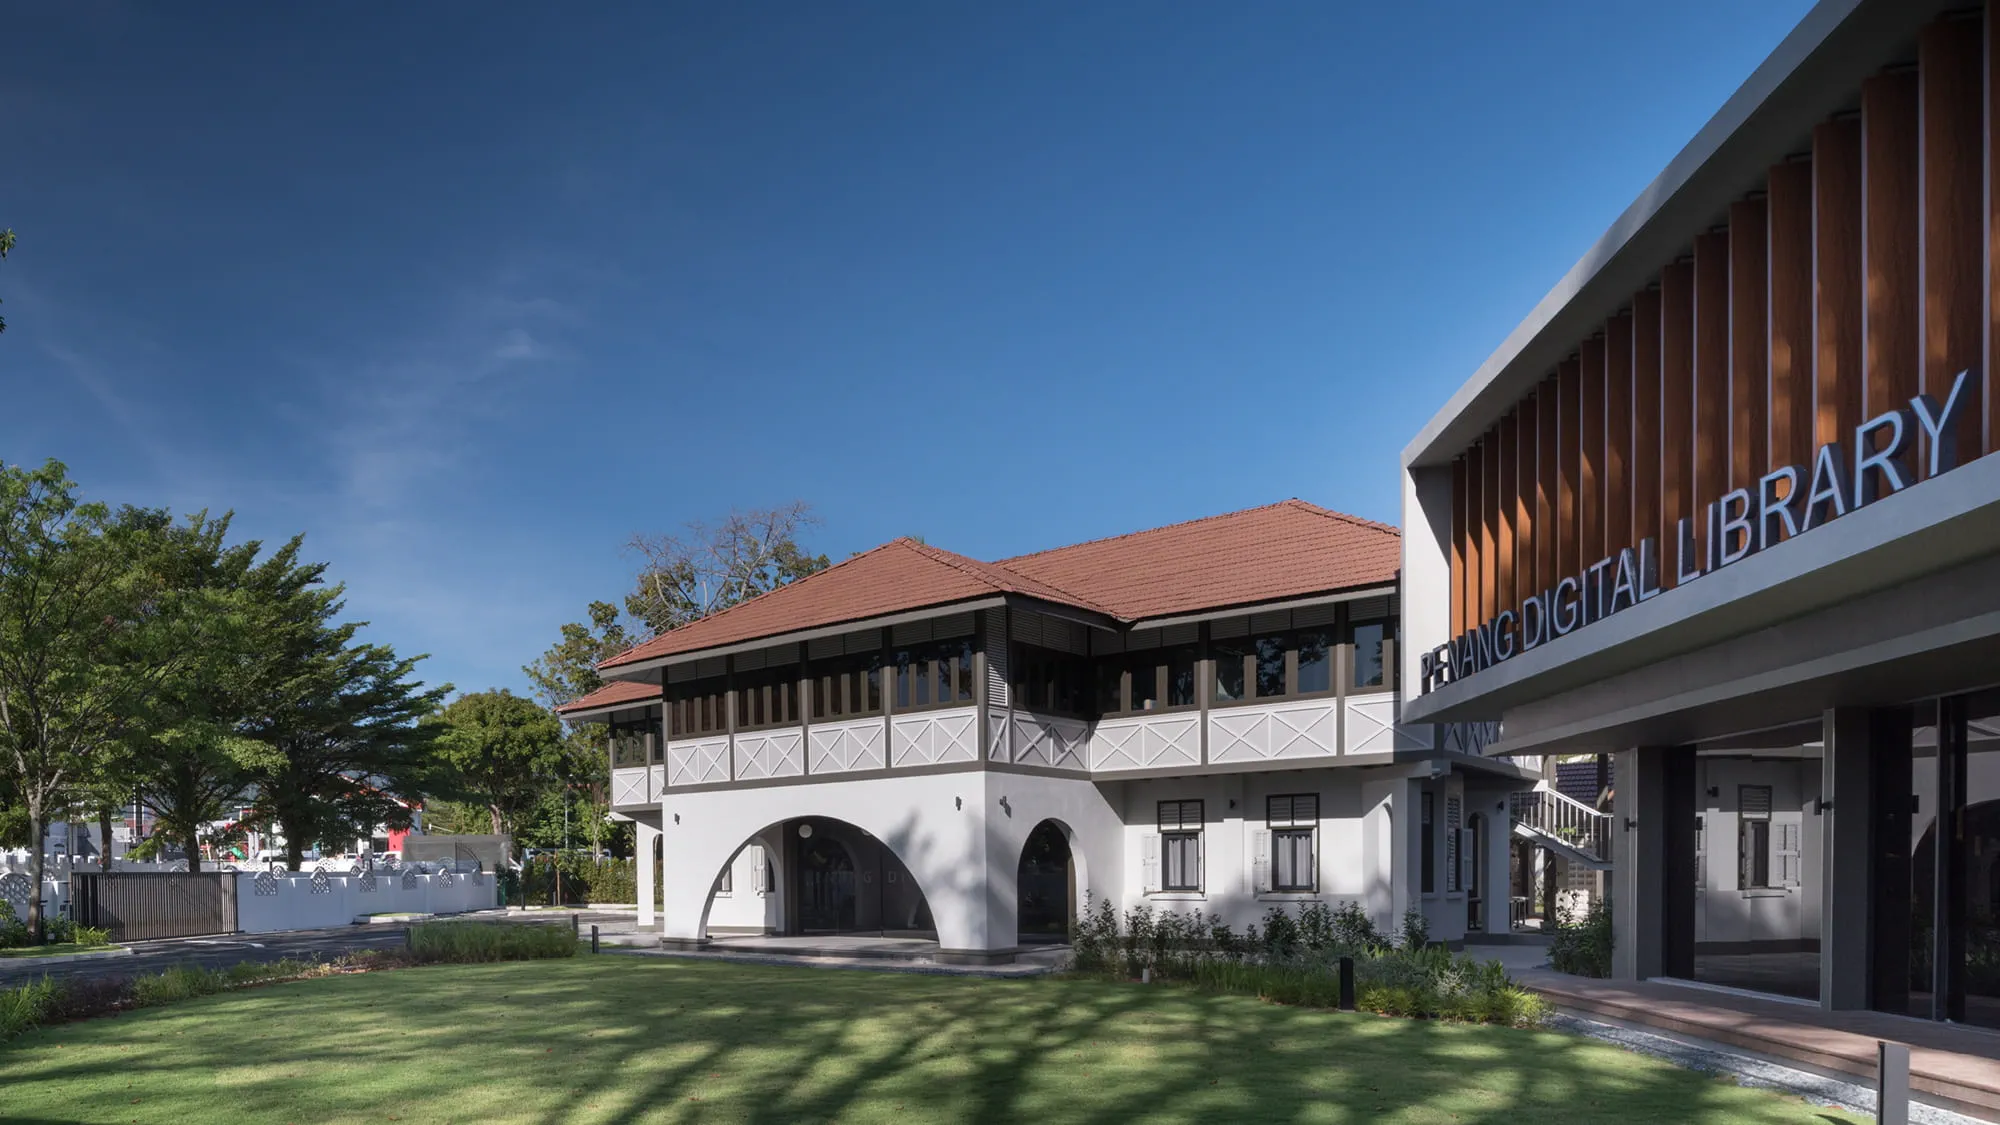 Penang Digital Library II is located in a conserved Anglo-Indian styled mansion